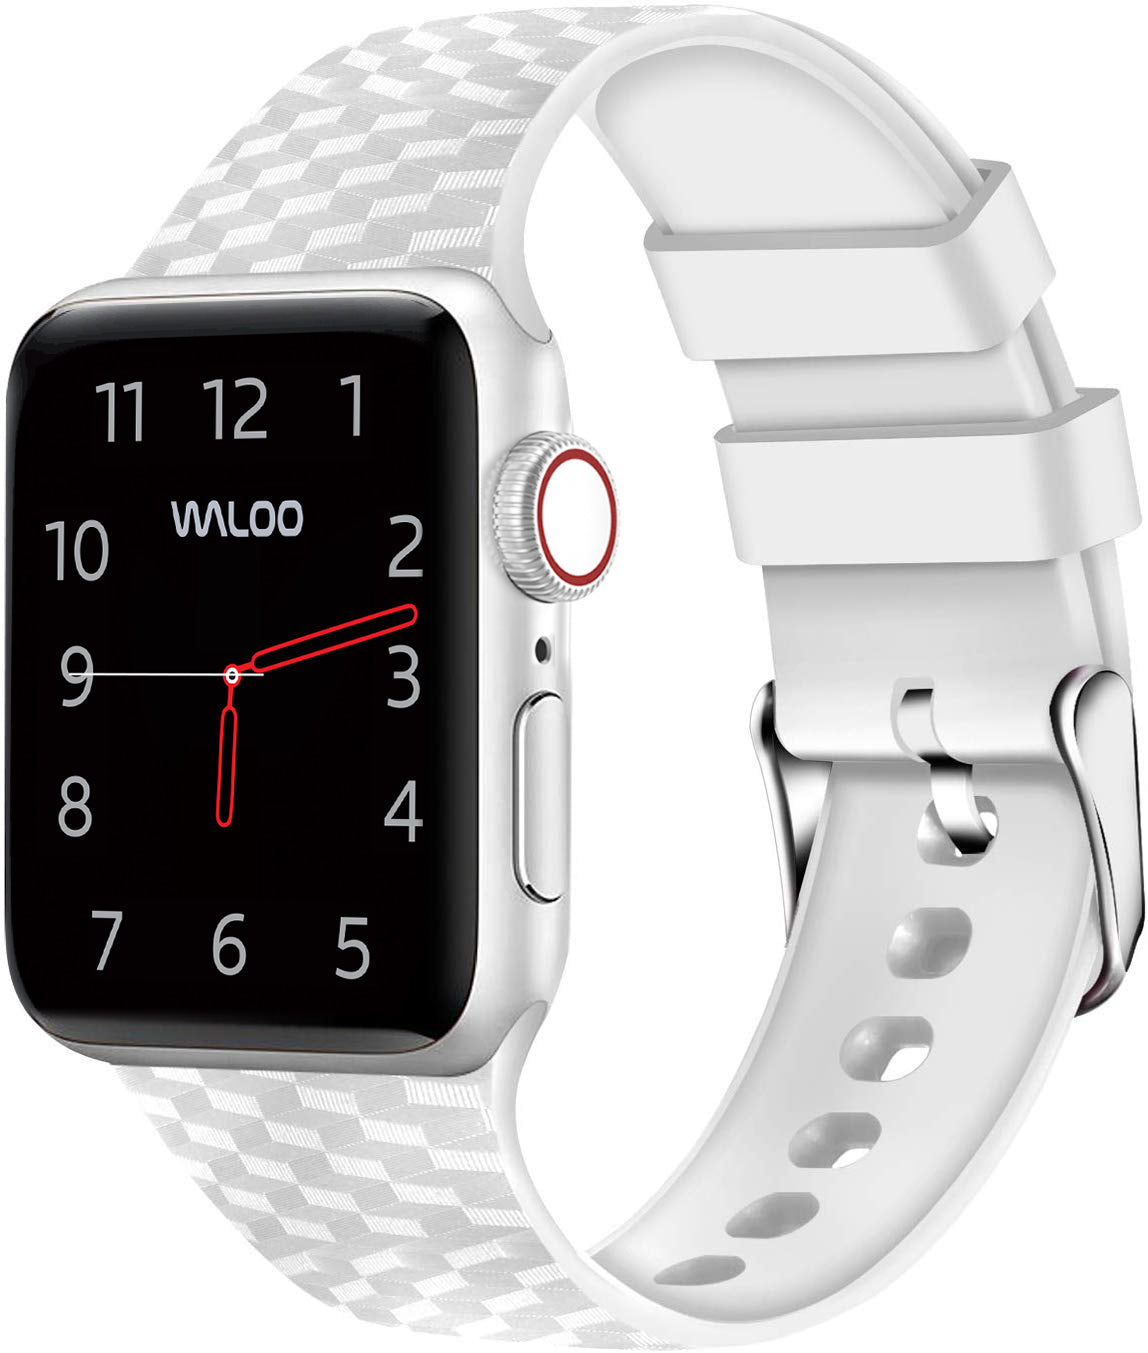 Waloo Carbon Fiber Silicone Band For Apple Watch